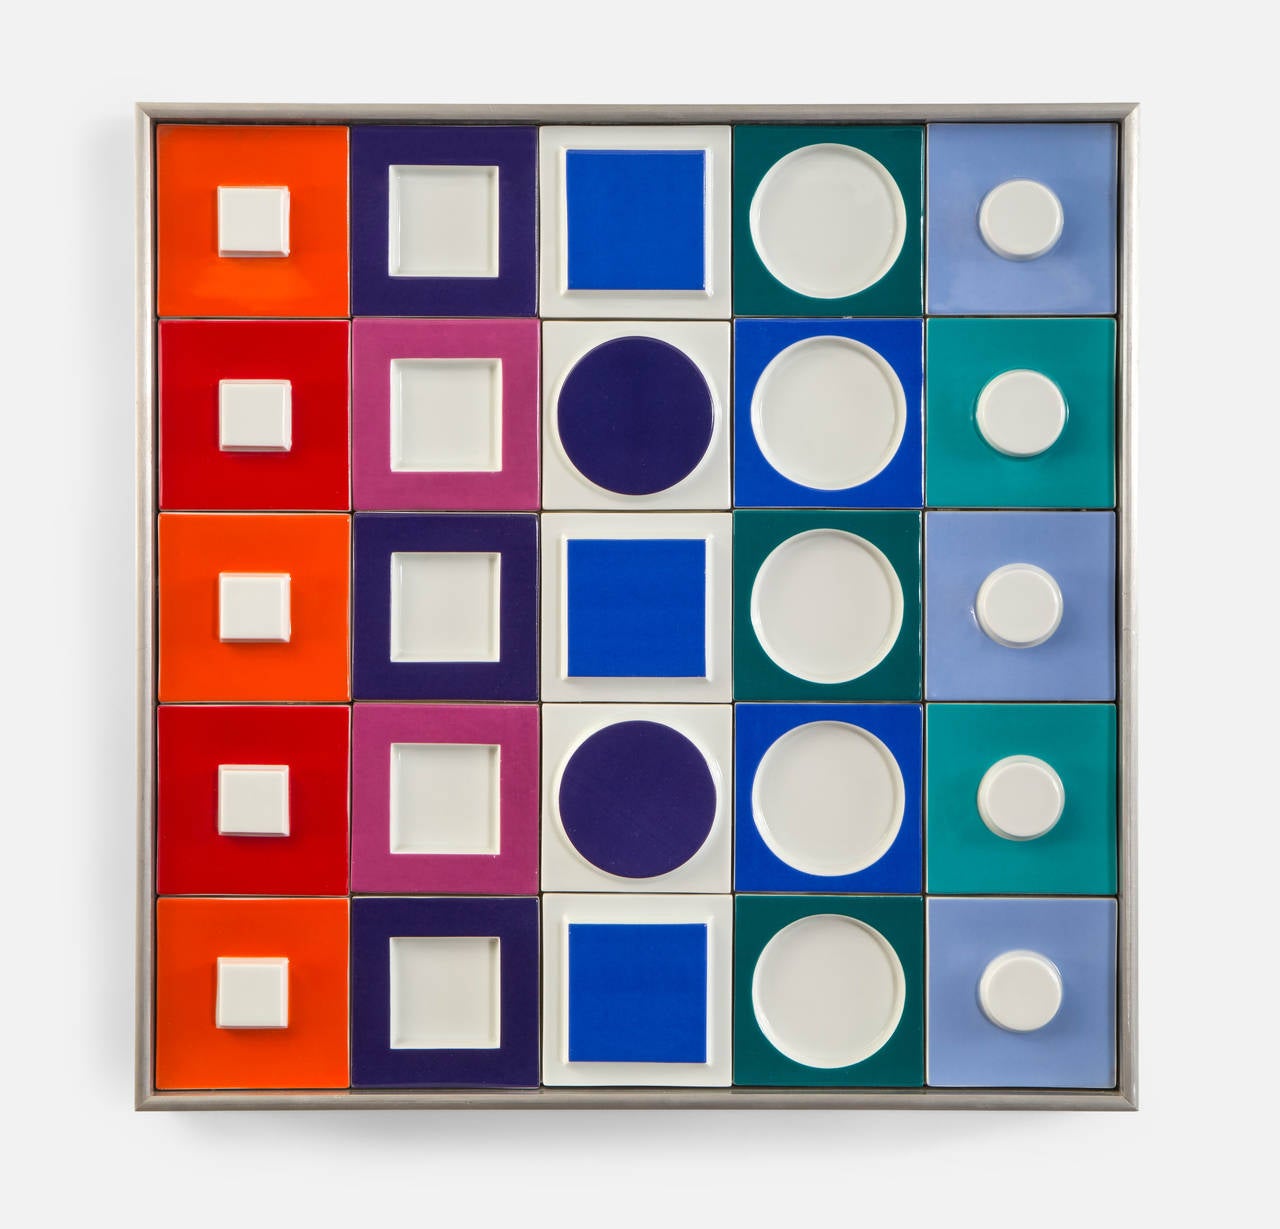 The twenty five square ceramic tiles in polychrome geometric patterns within an aluminum frame. Signed and numbered: 3/50 and 8/50.